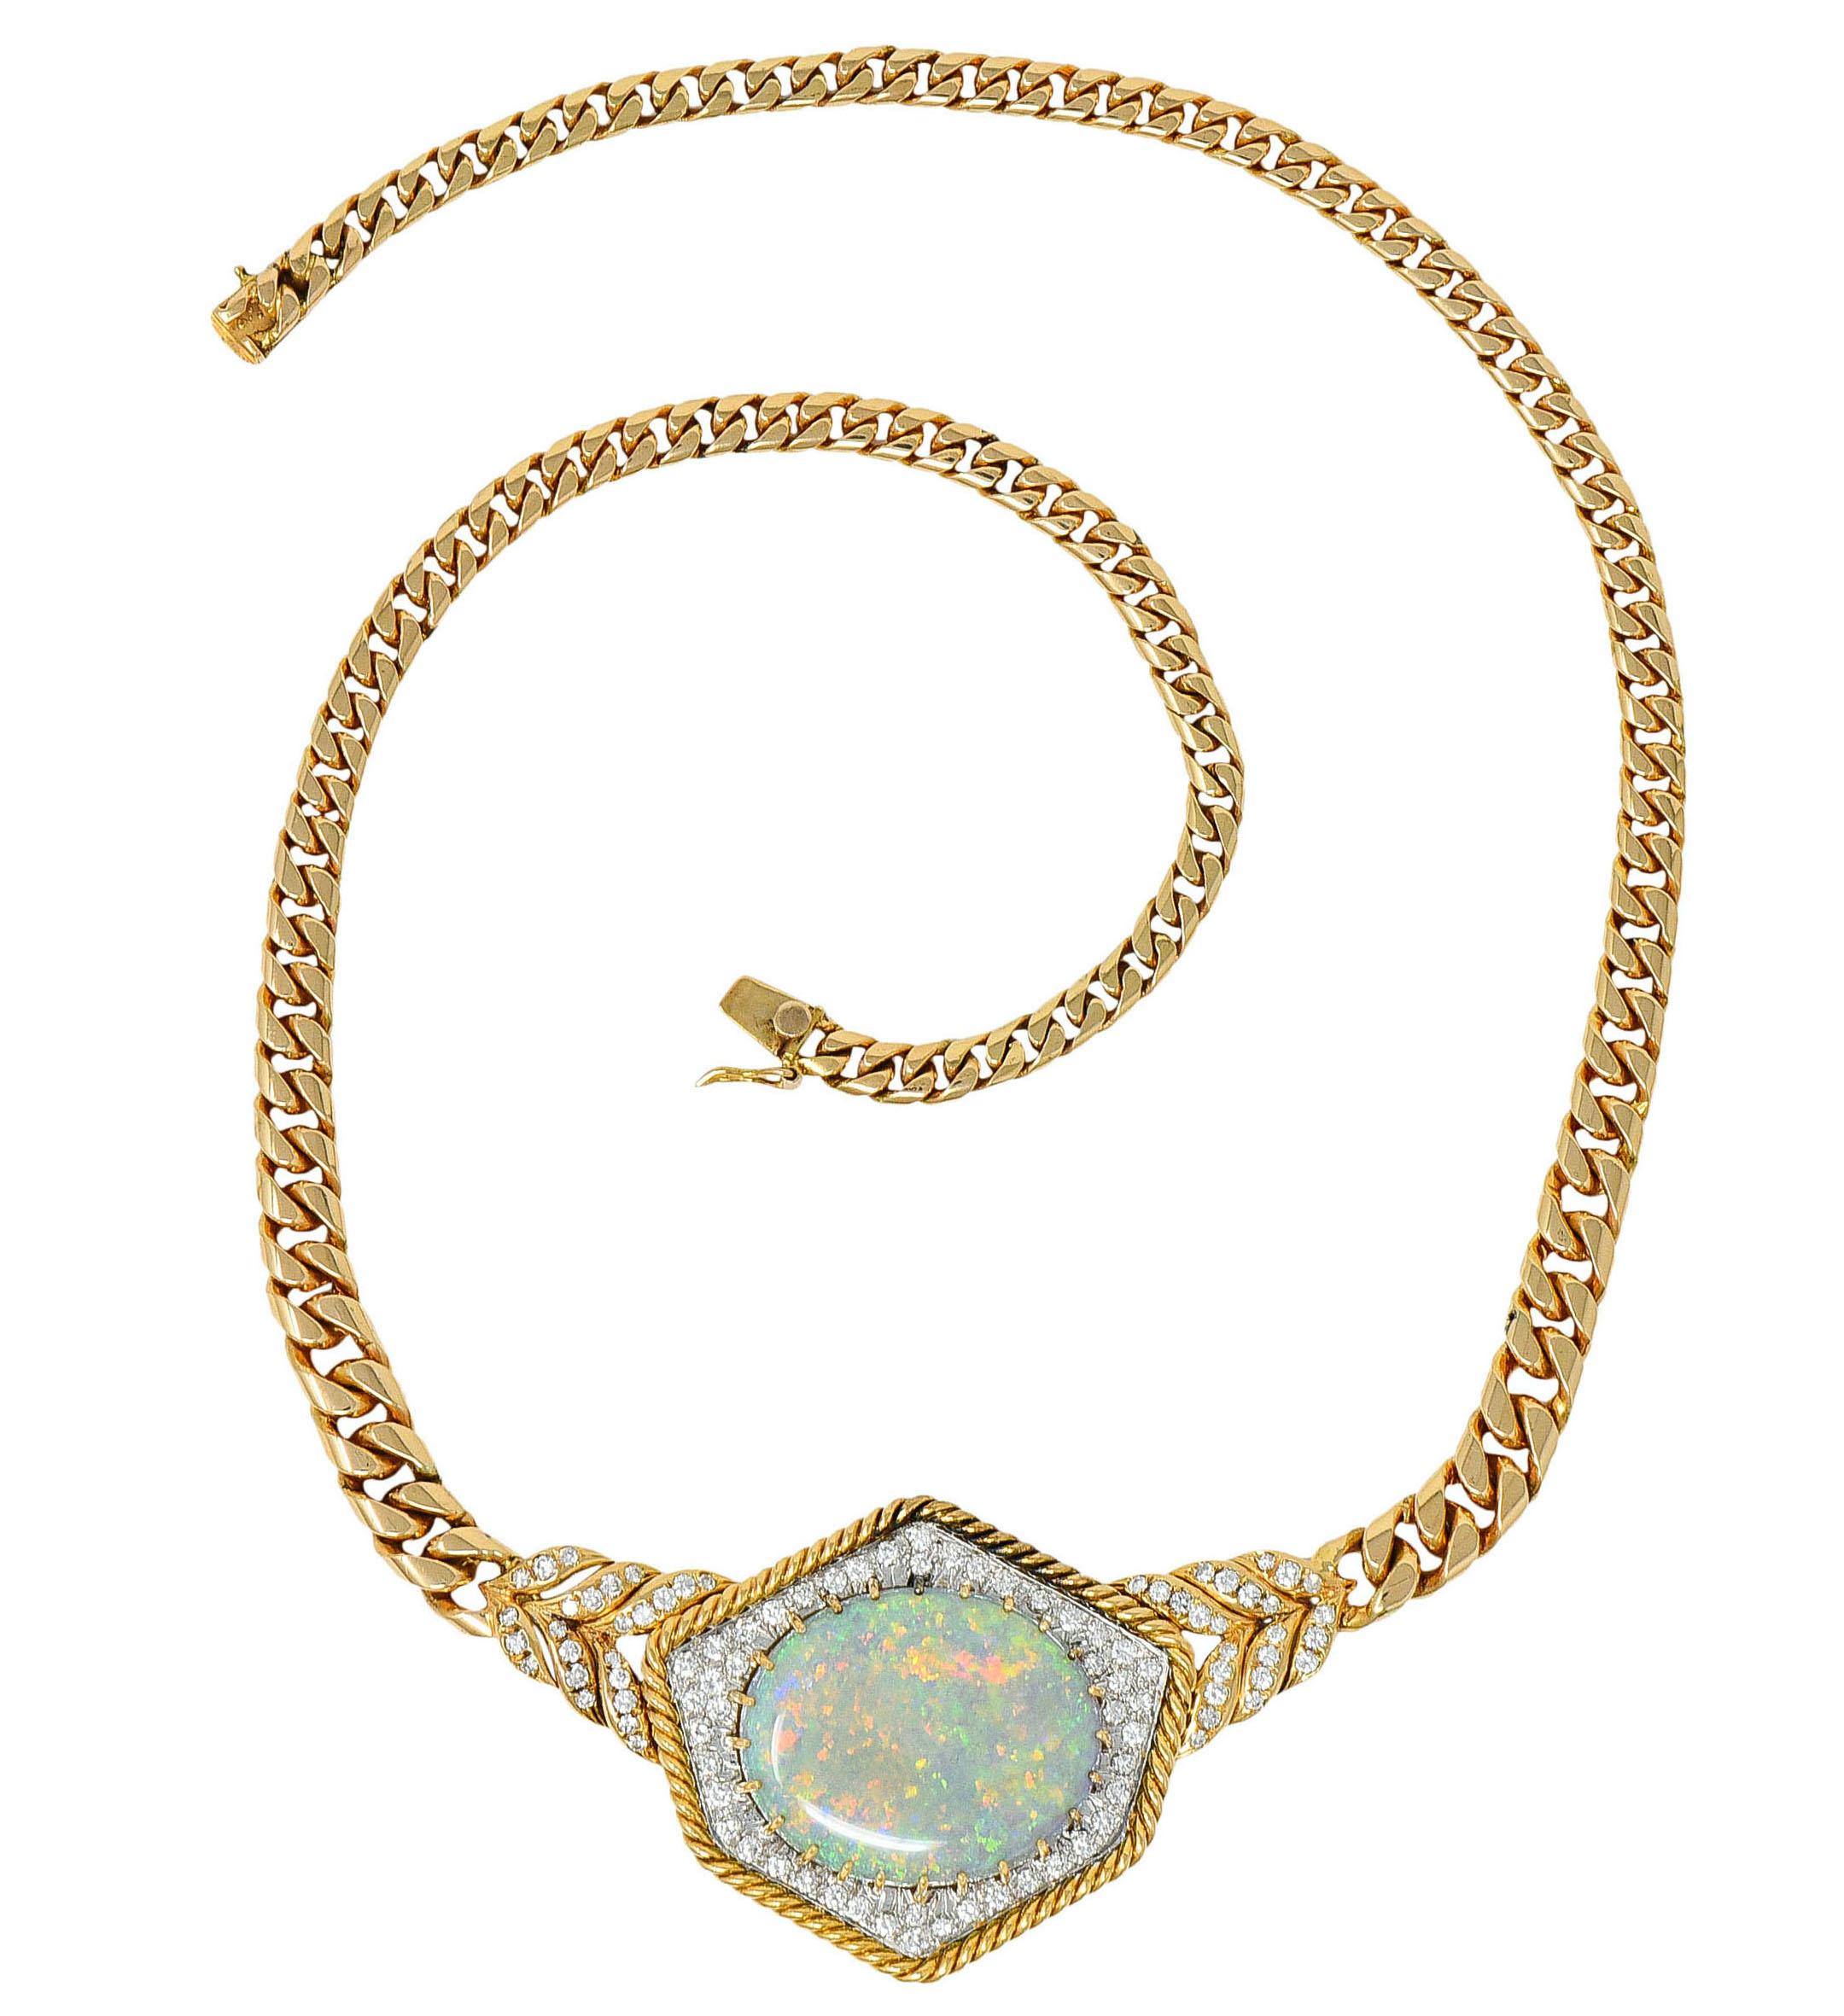 Statement necklace is designed with a polished gold cuban chain and centers a hexagonal twisted rope station

Featuring a claw set opal cabochon measuring approximately 25.3 x 20.5 mm; with strong spectral play-of-color

Surrounded by round